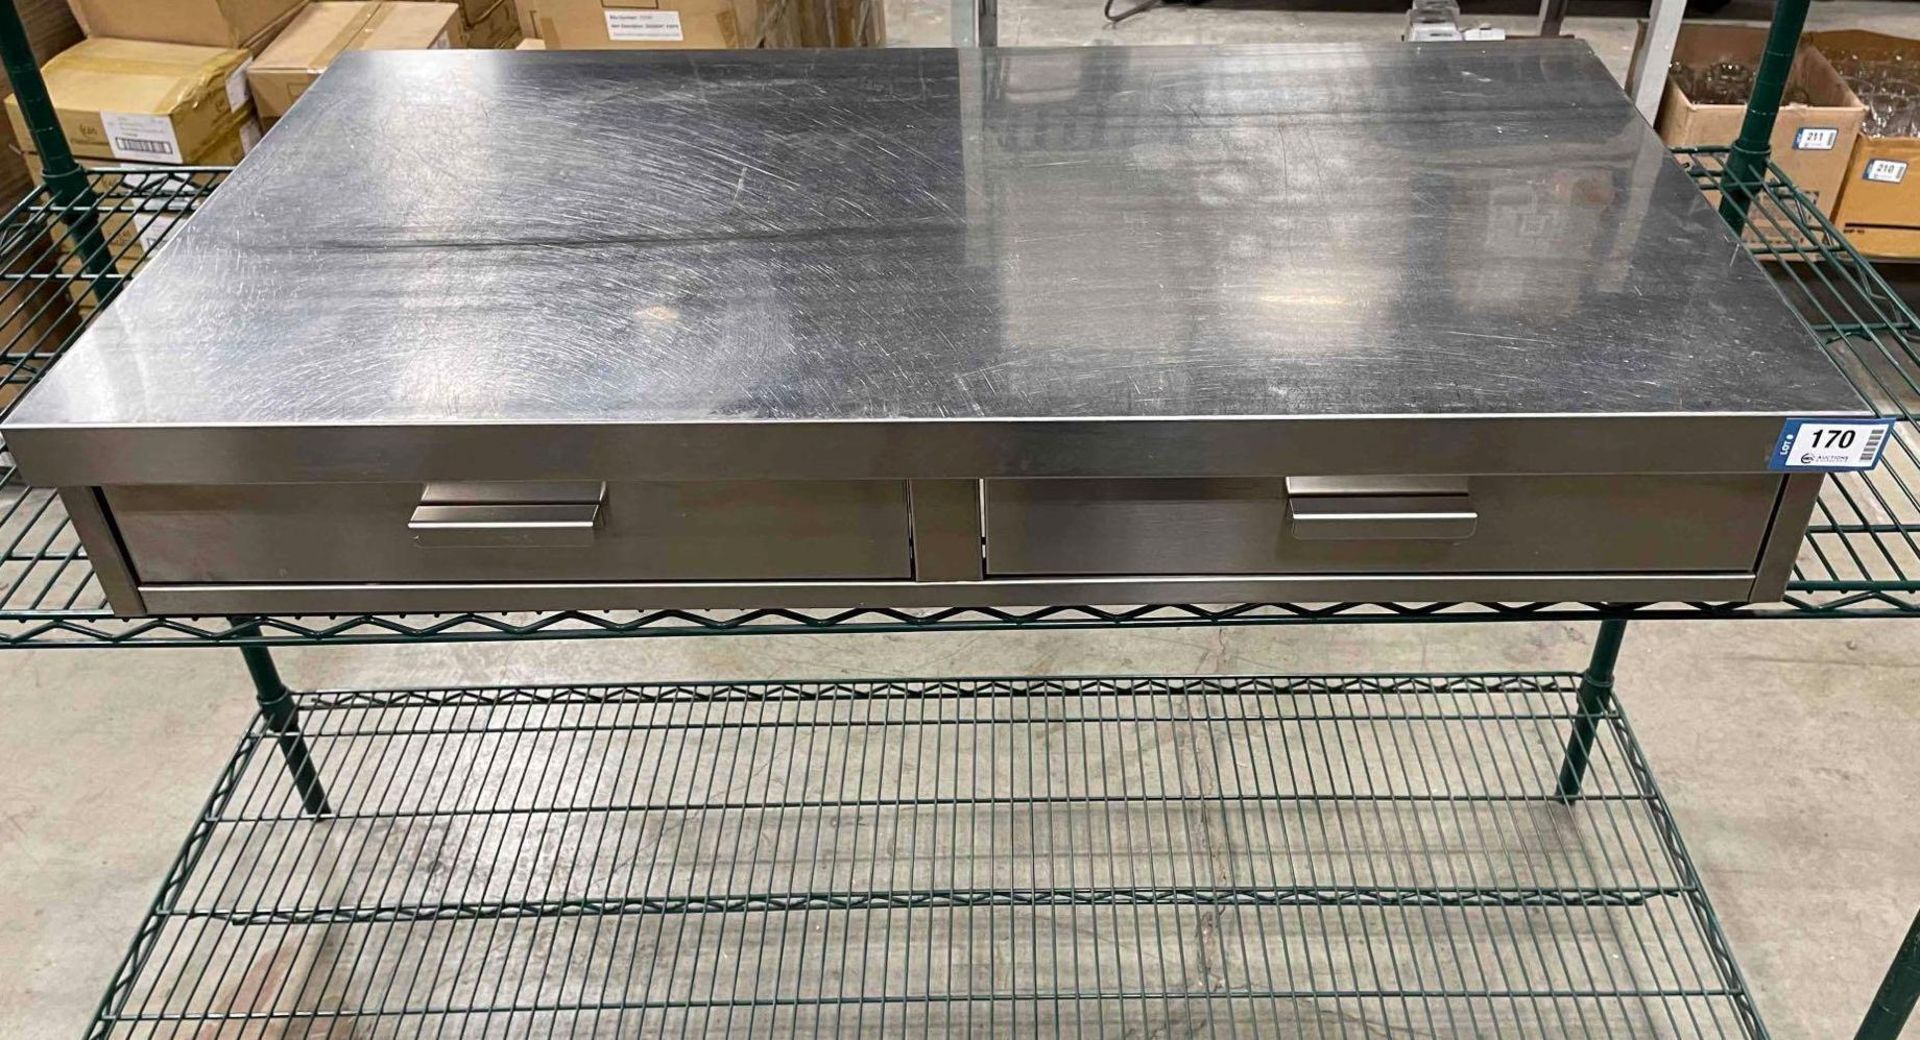 2 DRAWER STAINLESS STEEL RISER - Image 3 of 4